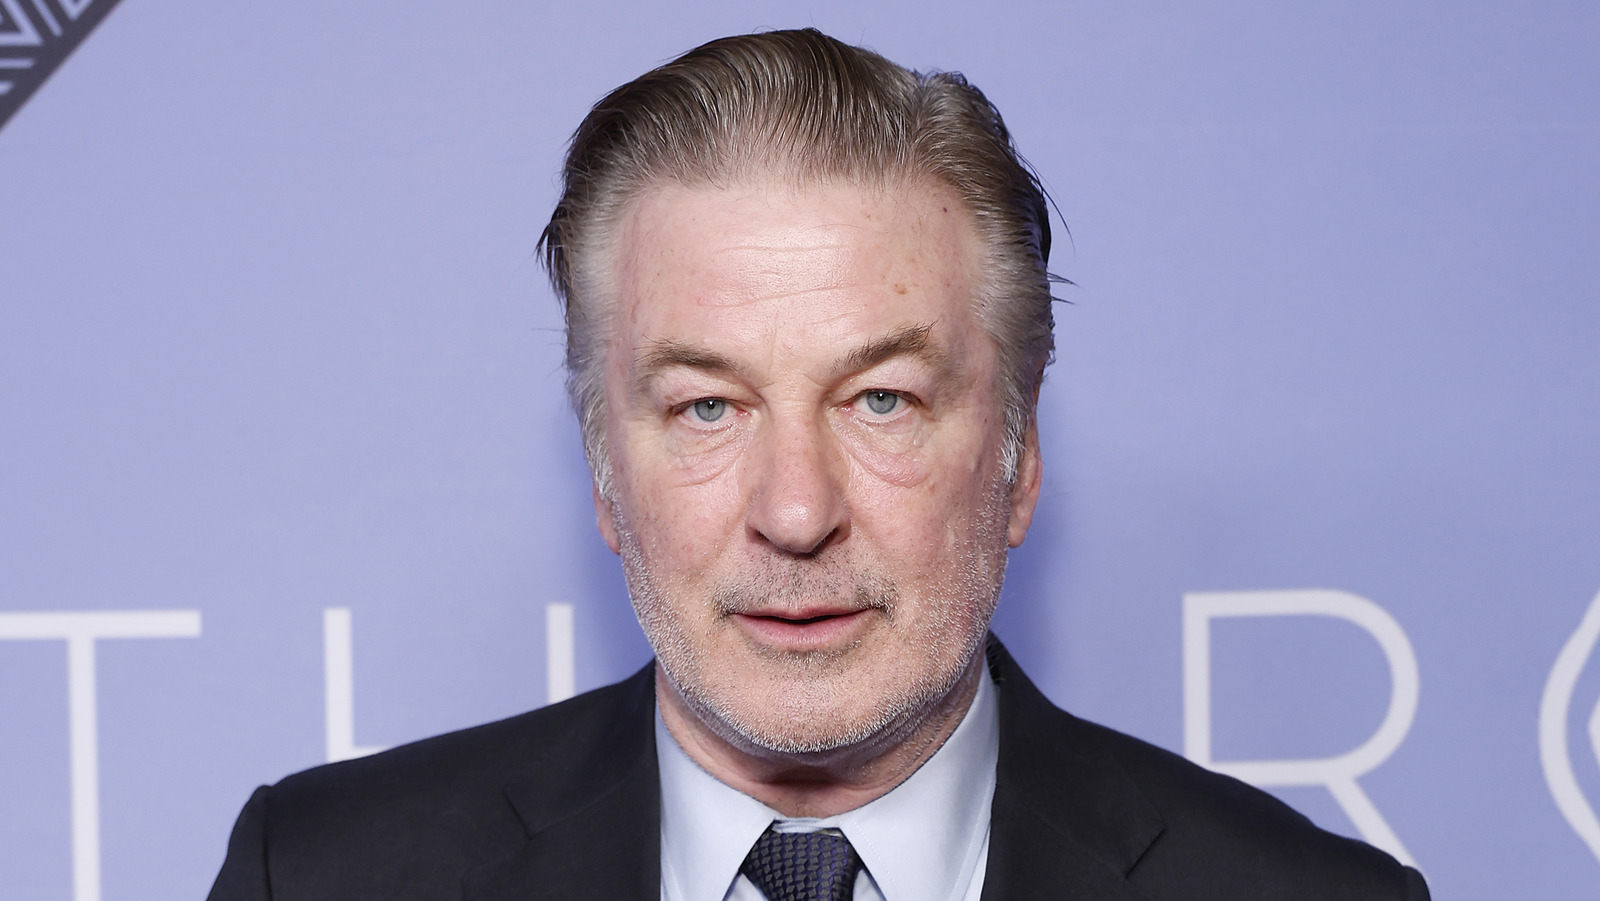 Alec Baldwin Recovers After Major Surgery In Update From Wife Hilaria